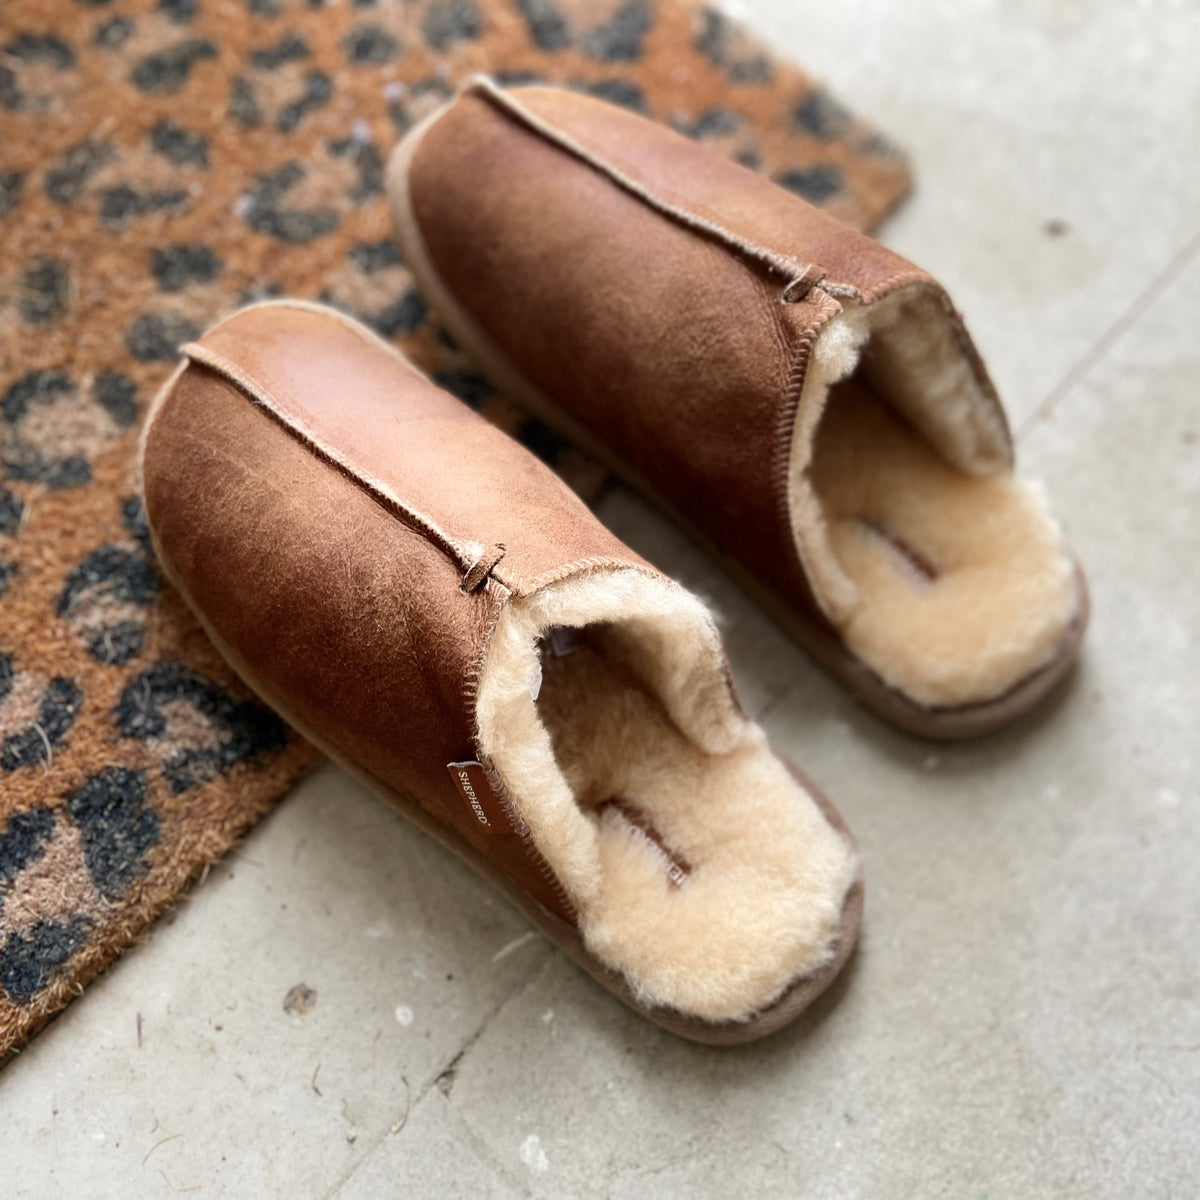 Amazon.com: Furry sheepskin slippers for women | Fuzzy open toe sheepskin  slides | Cozy slides | Warm house shoes | Fluffy sheepskin mules (US 5.5-6  (women) 9.2 inches / 23.5 cm, Olive Green) : Handmade Products